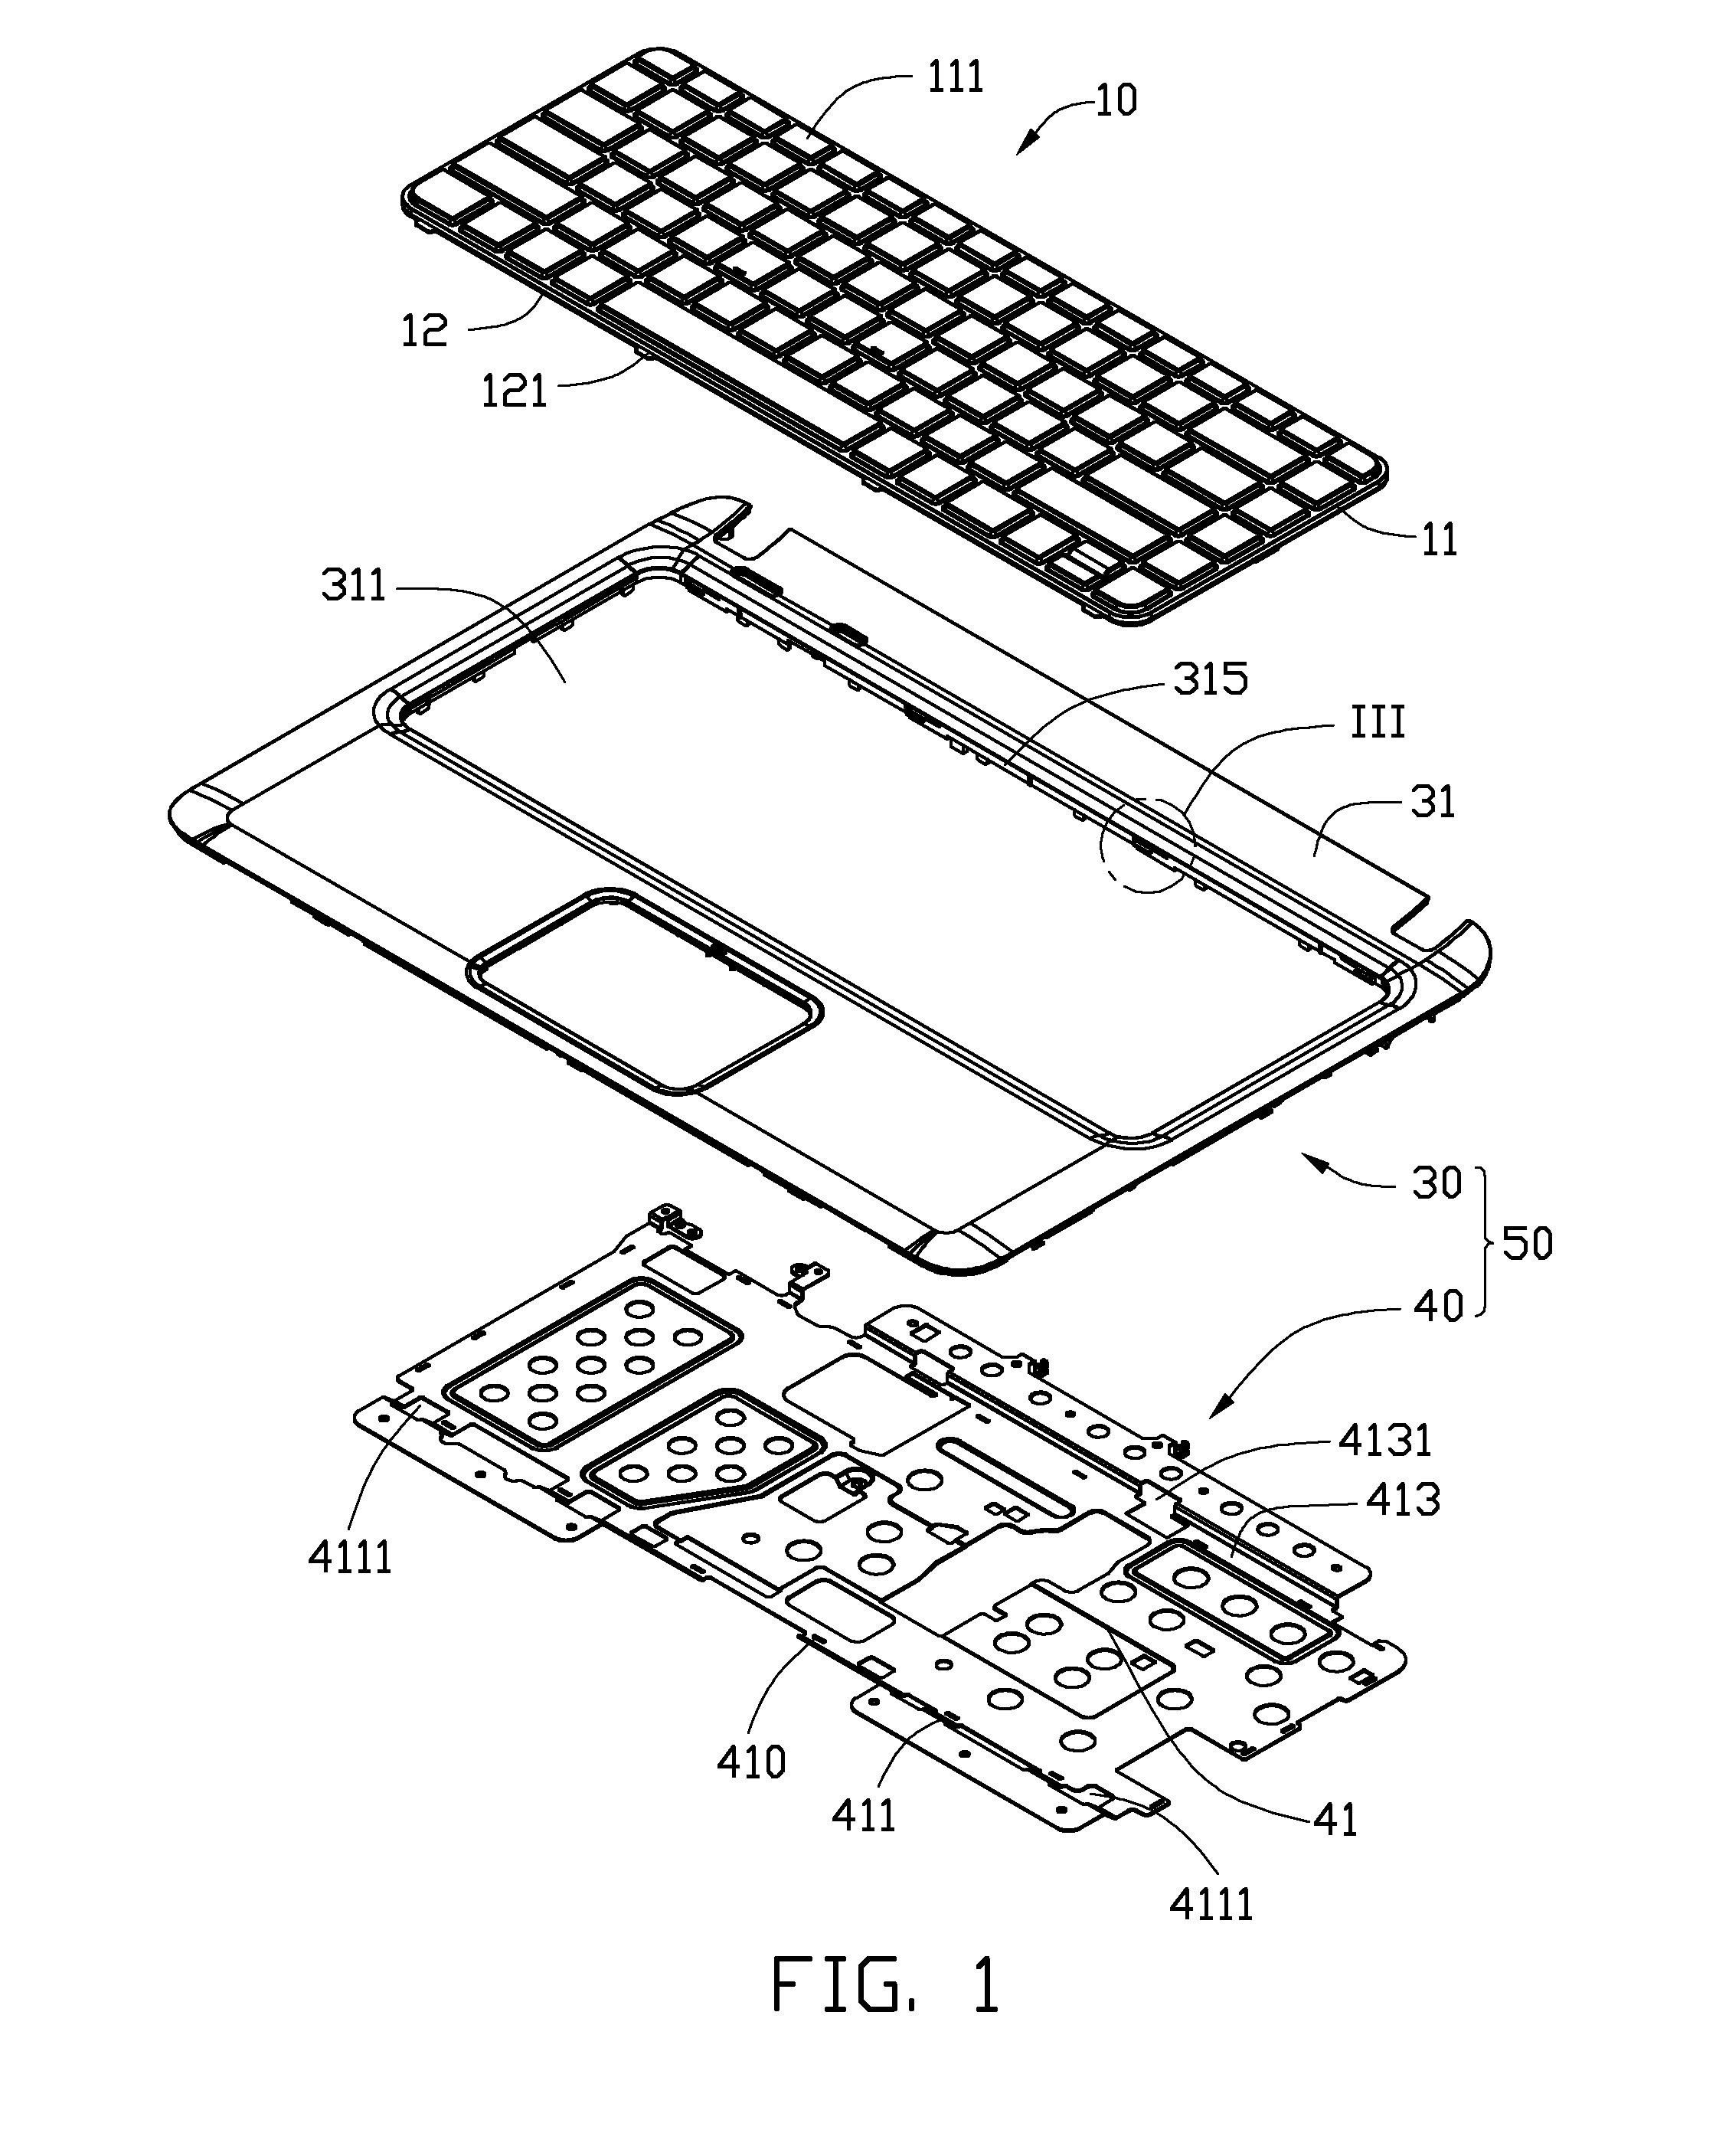 Mounting apparatus for computer keyboard